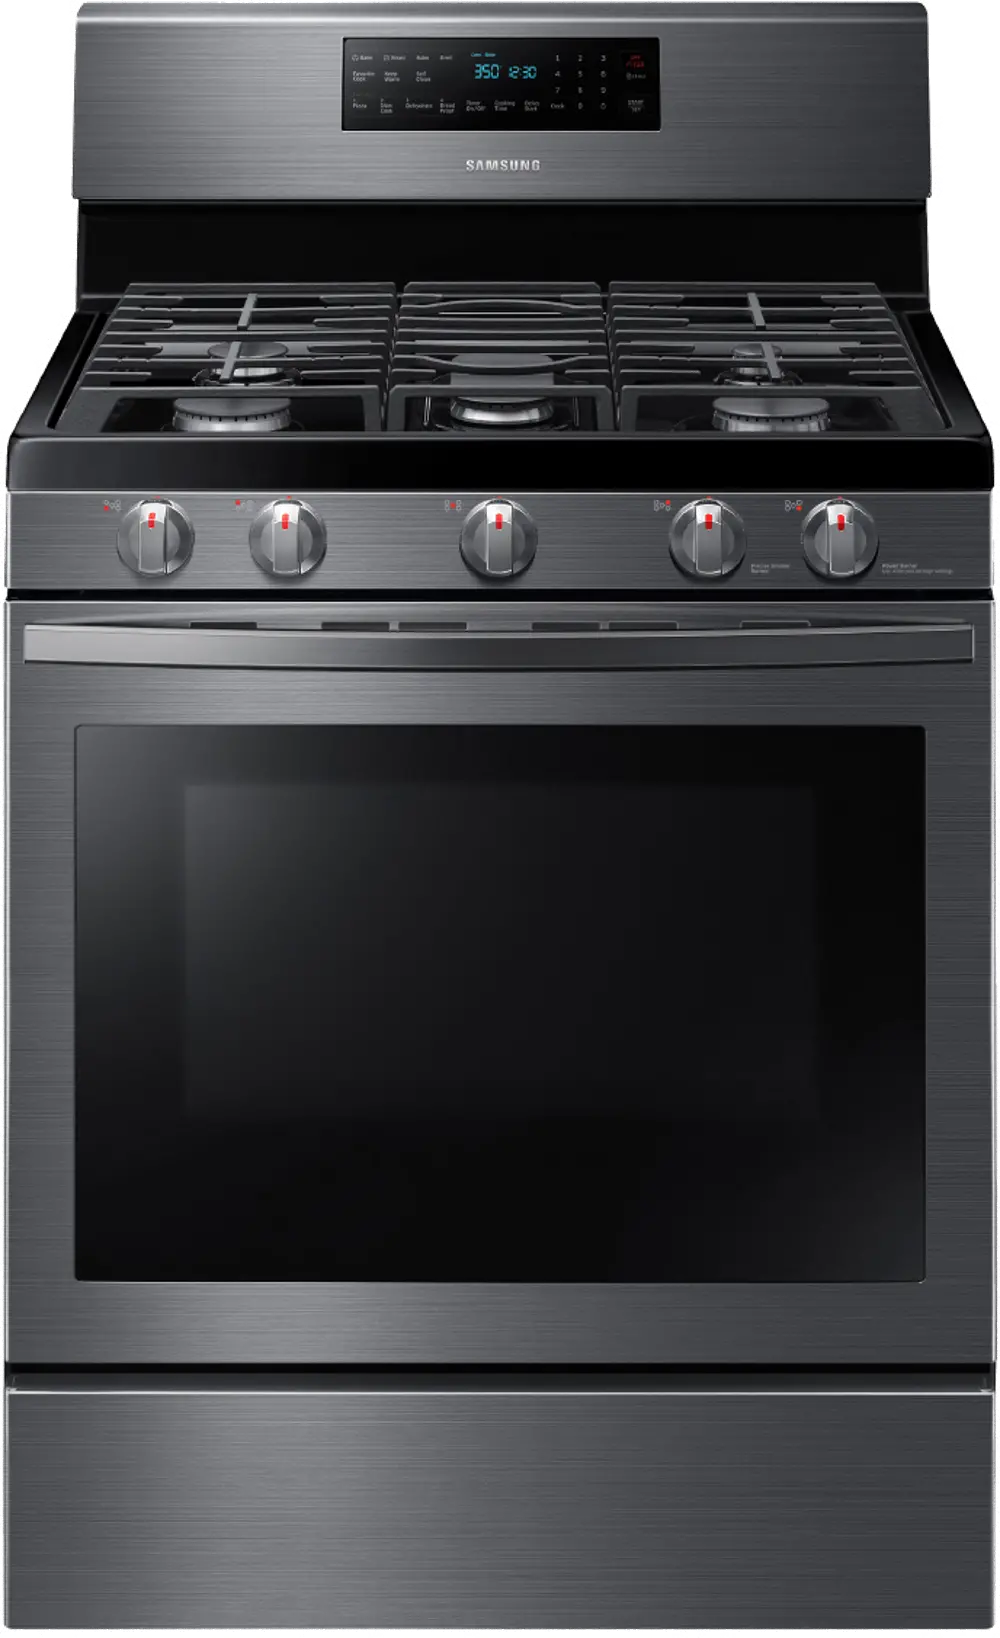 NX58R5601SG Samsung Gas Convection Range - Black Stainless Steel-1